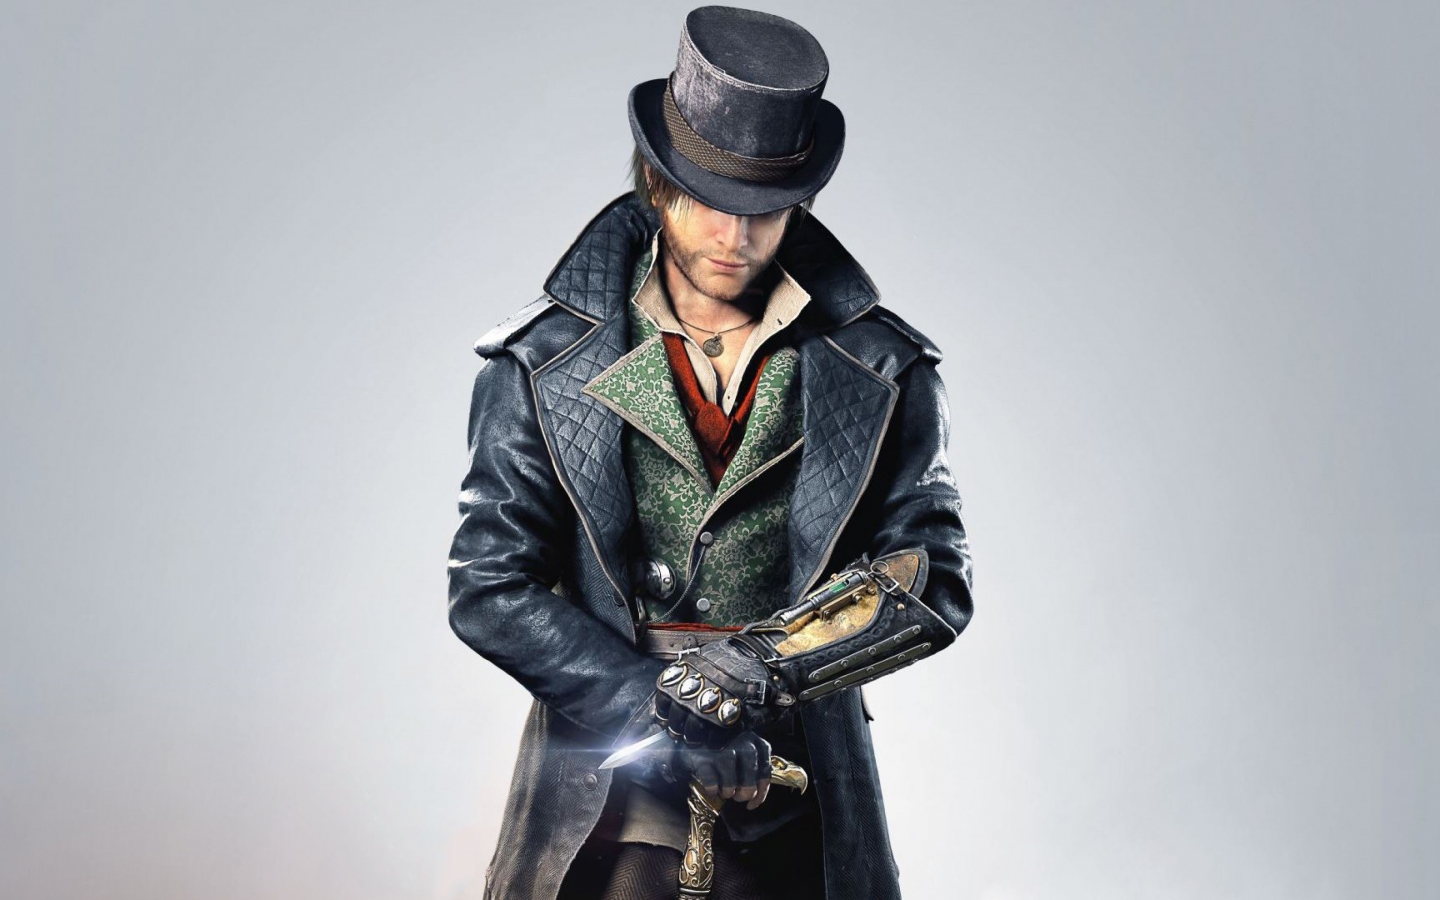 assassins creed syndicate jacob Fry equipment 102811 3840x2400